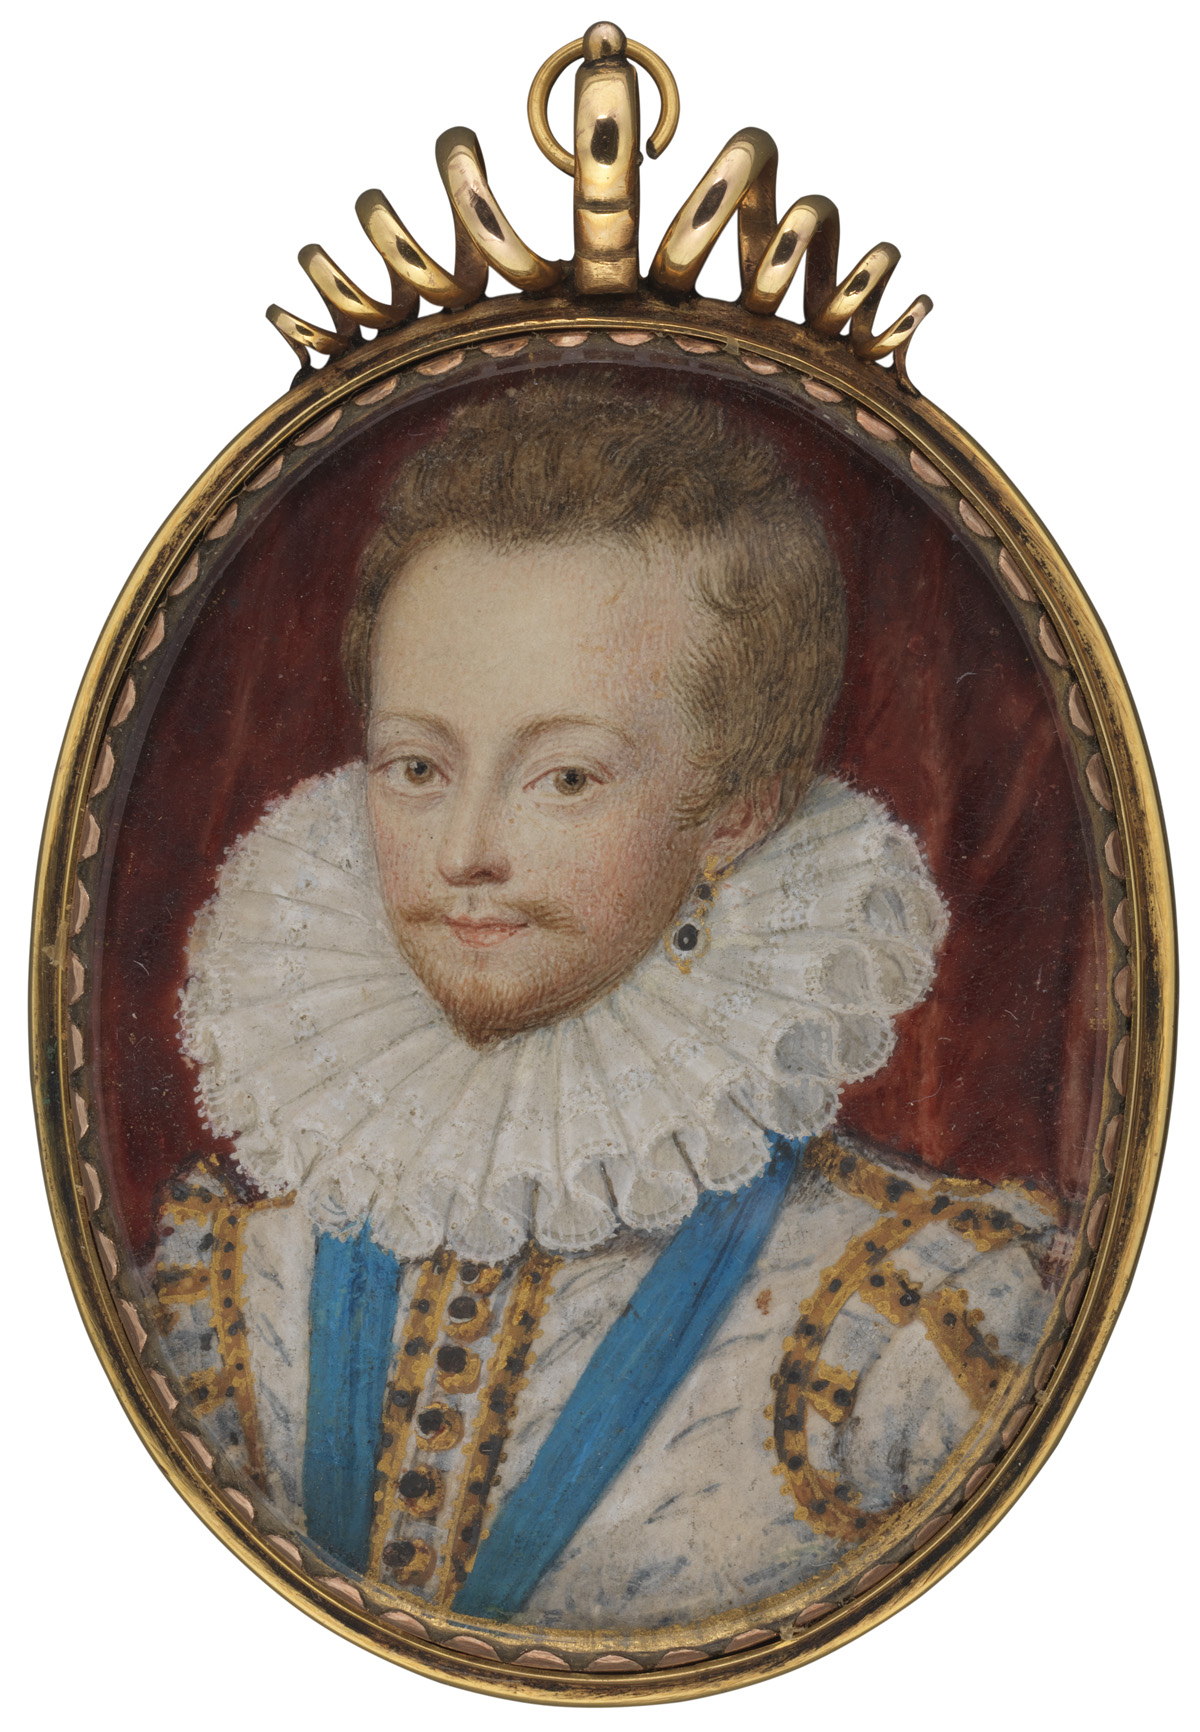 Robert Carr, Earl of Somerset (1587-1645), favourite of James I, by Nicholas Hilliard, watercolour on vellum, c.1611 © National Portrait Gallery, London